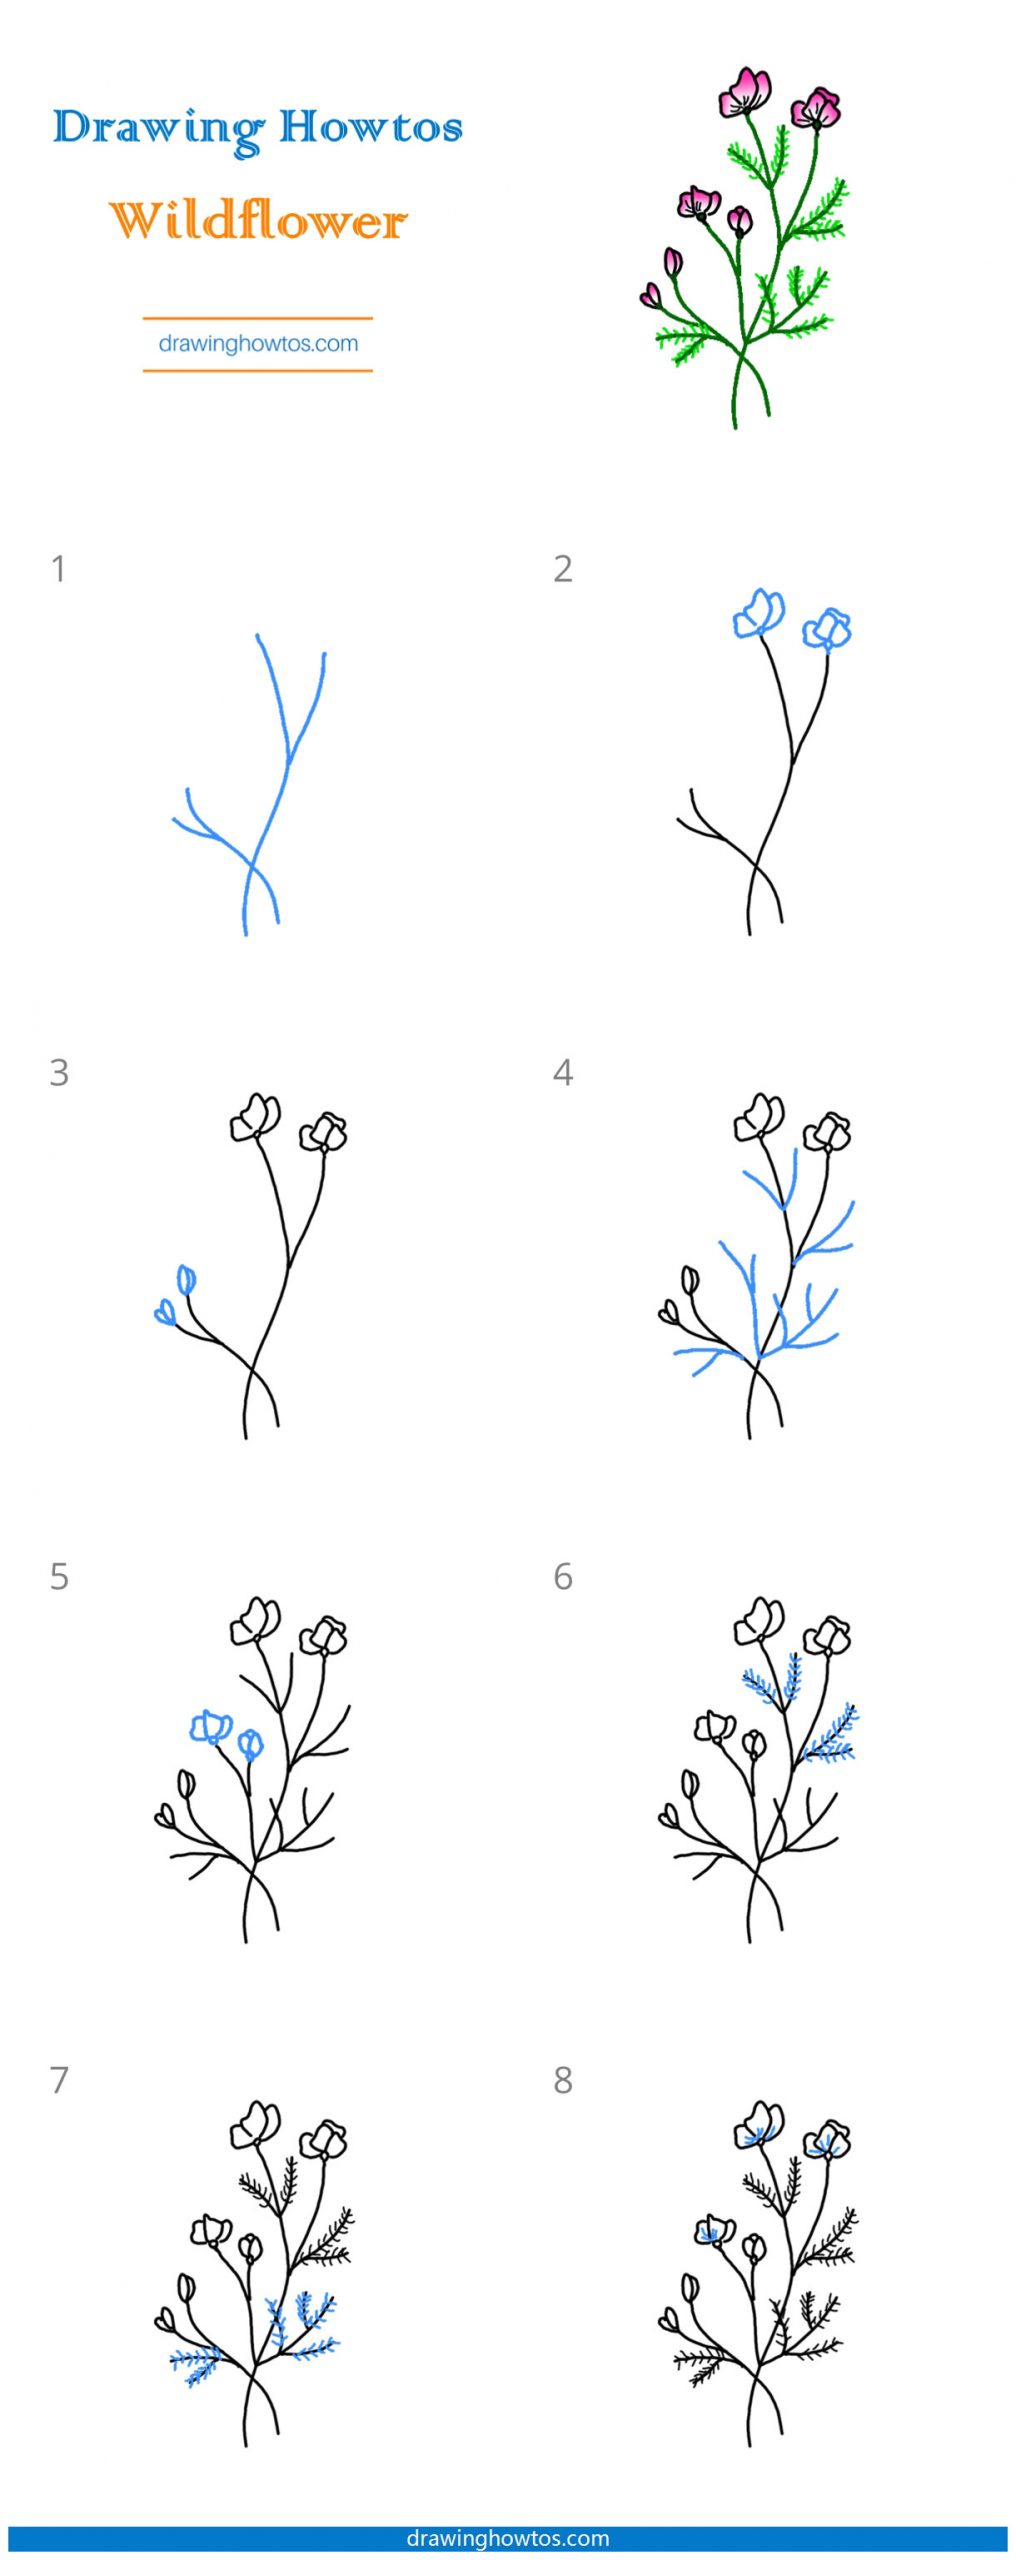 How to Draw Wildflowers Step by Step Easy Drawing Guides Drawing Howtos